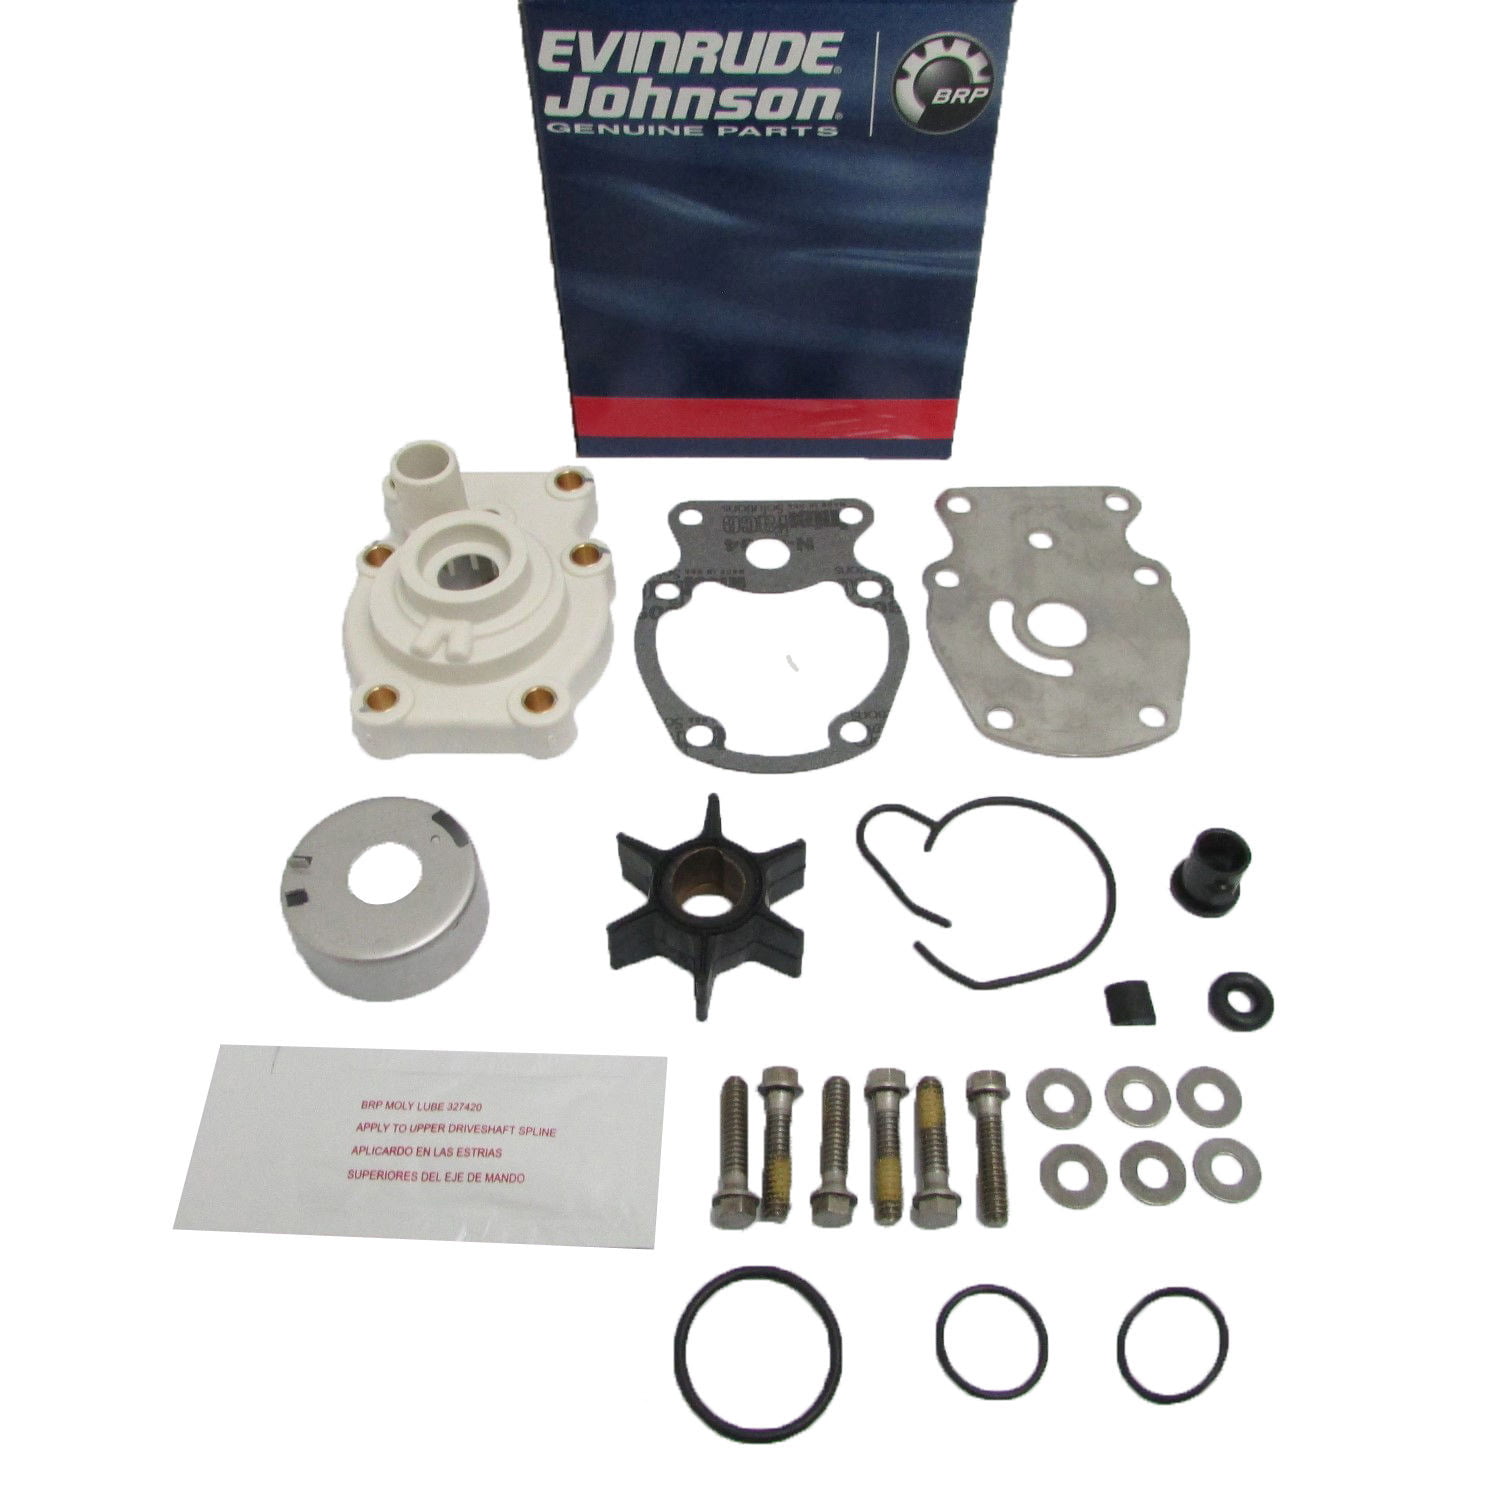 ALL-CARB Water Pump Repair Kit Replacement for Johnson Evinrude OMC 20 25 30 35 HP Outboard Boat Motor Parts 393630 0393630 